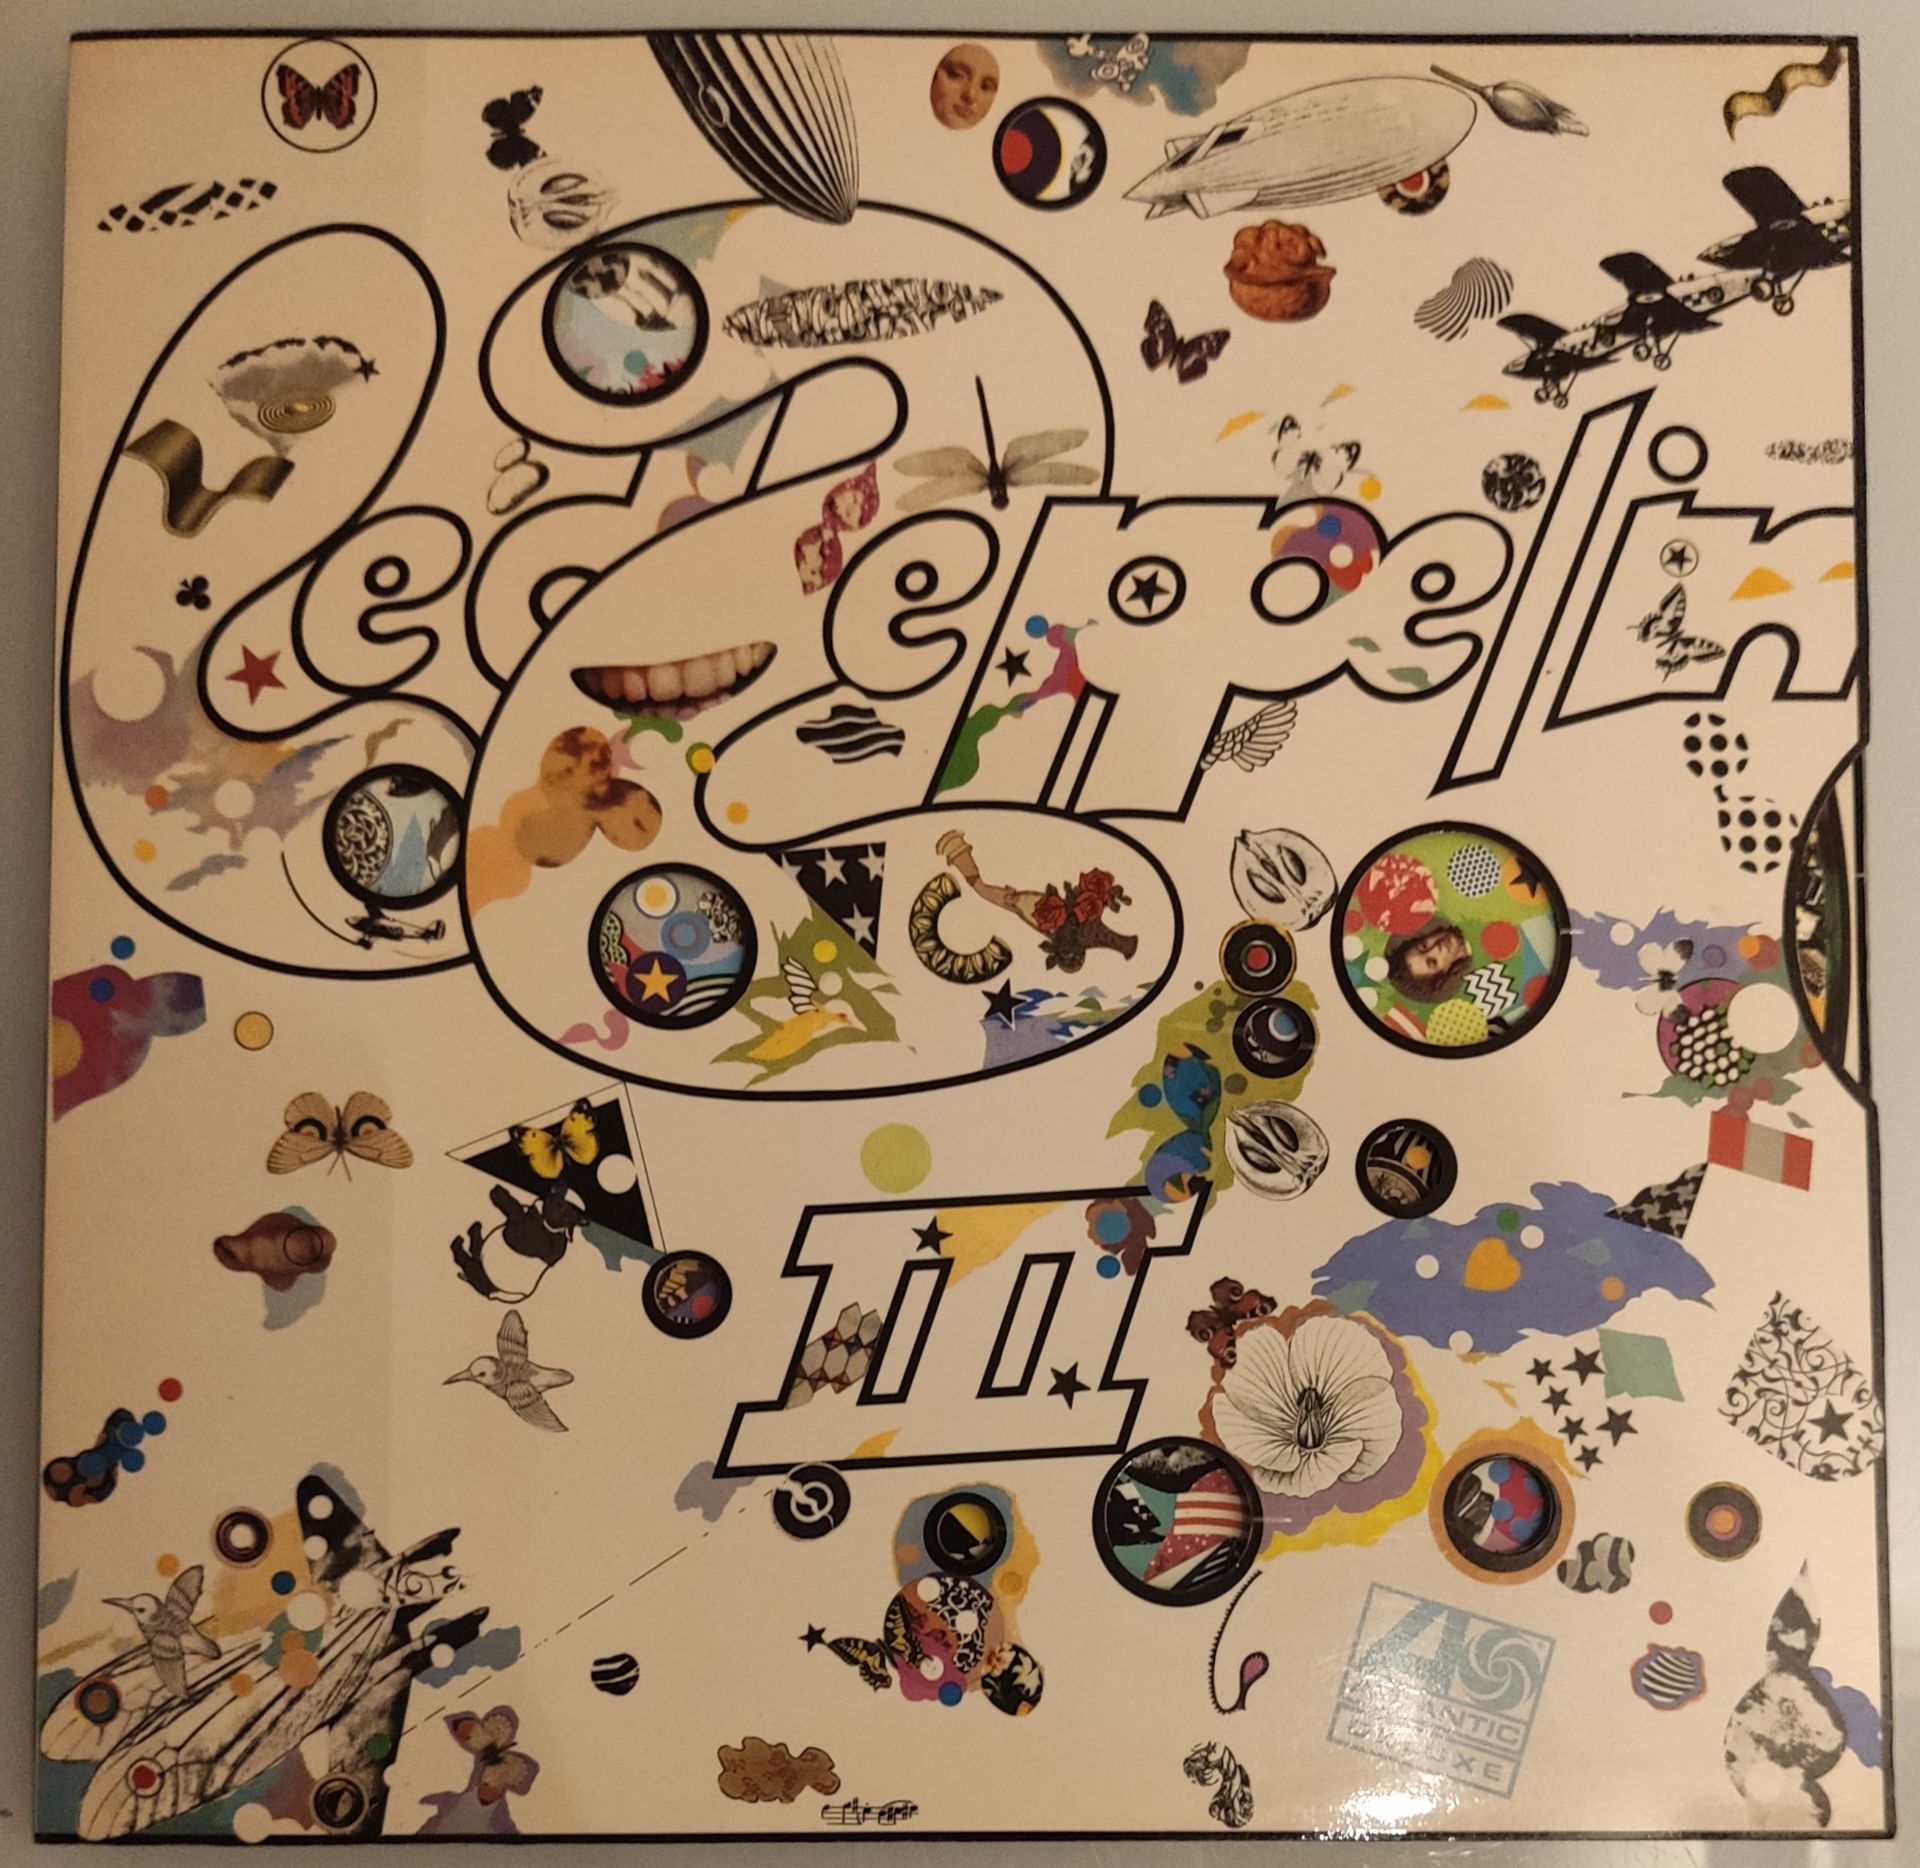 Led Zeppelin III UK 1970 1st Pressing - Peter Grant Credit - A5 / B5 - VG+ To EX. - Image 9 of 11